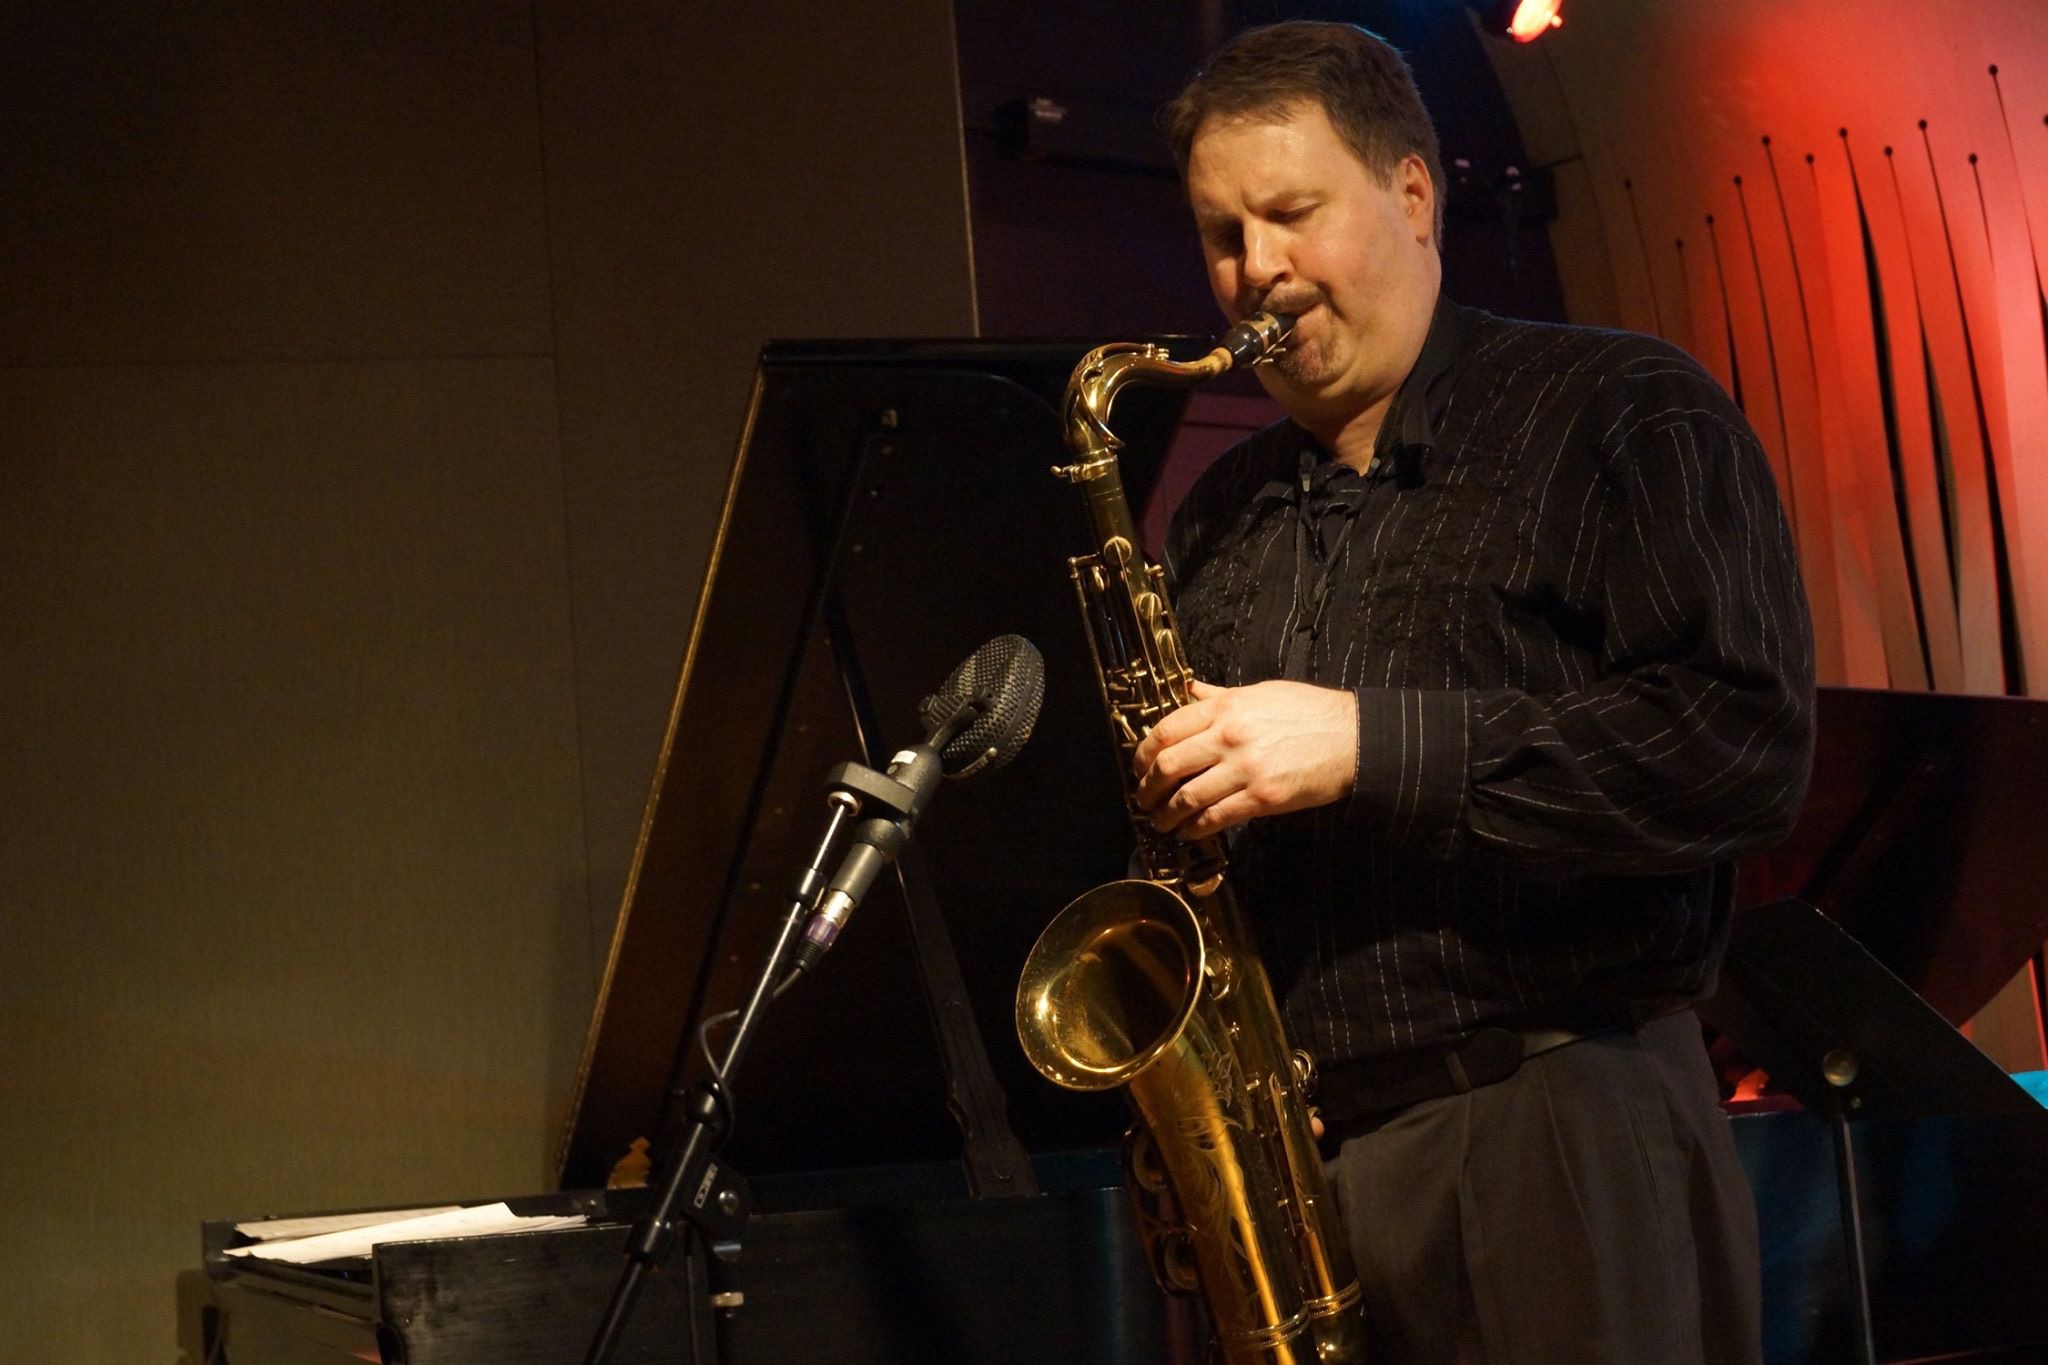 Tenor saxophonist Russ Nolan in performance at Firehouse 12, New Haven, CT.